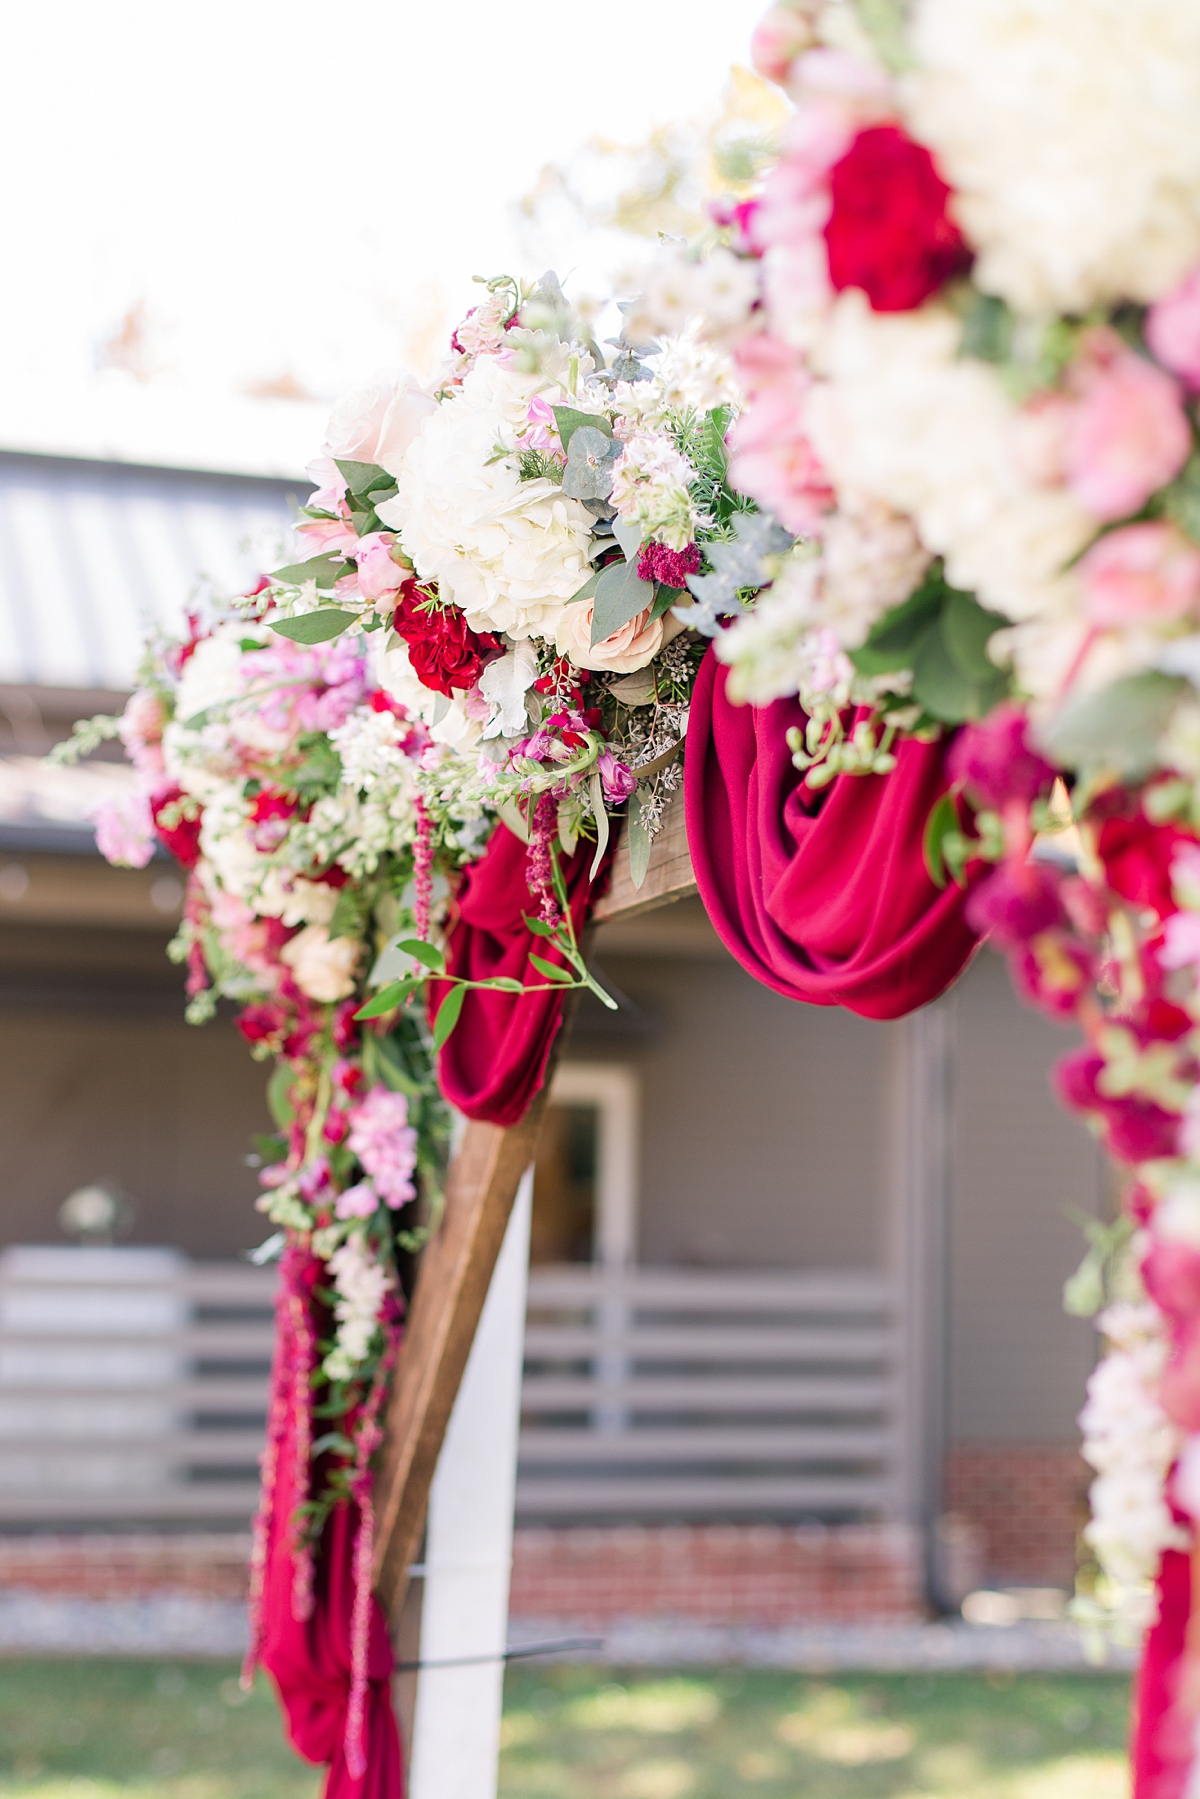 Ceremony Arch Florals at Hanover Tavern Fall Wedding. Wedding Photography by Richmond Wedding Photographer Kailey Brianne Photography. Florals by Lavender Lane Flowers & Gifts